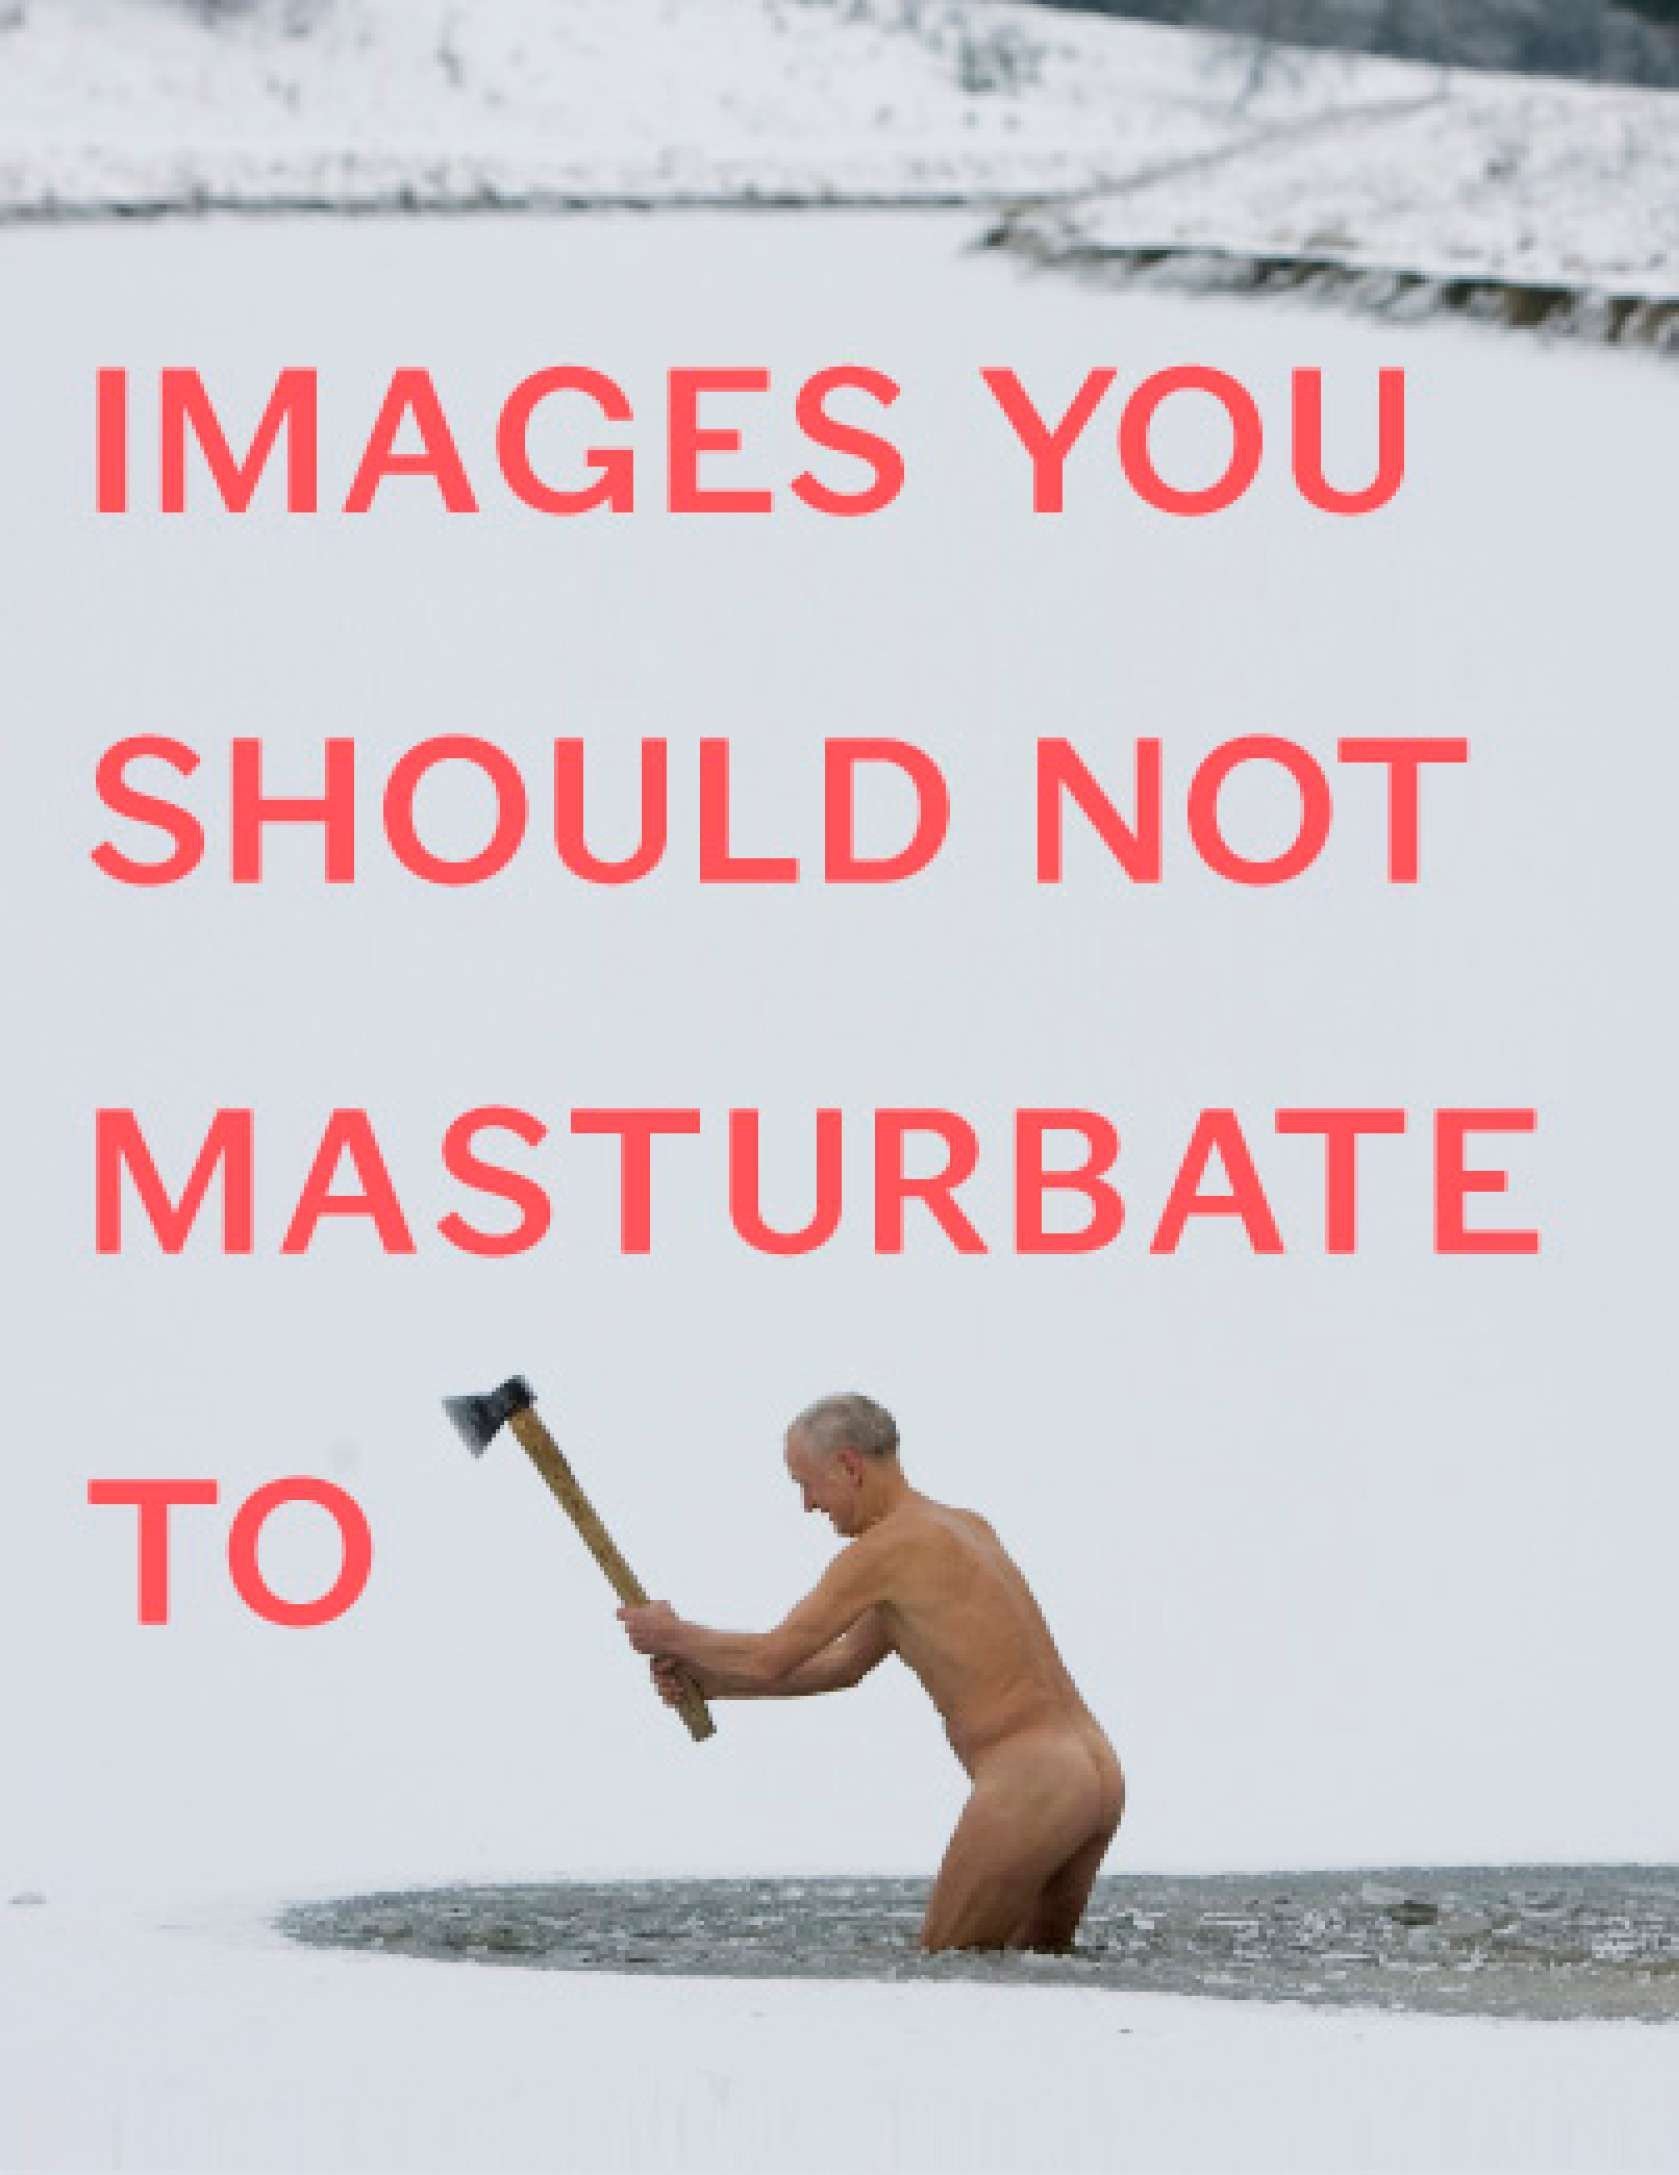 'Images You Should Not Masturbate To' by Graham Johnson